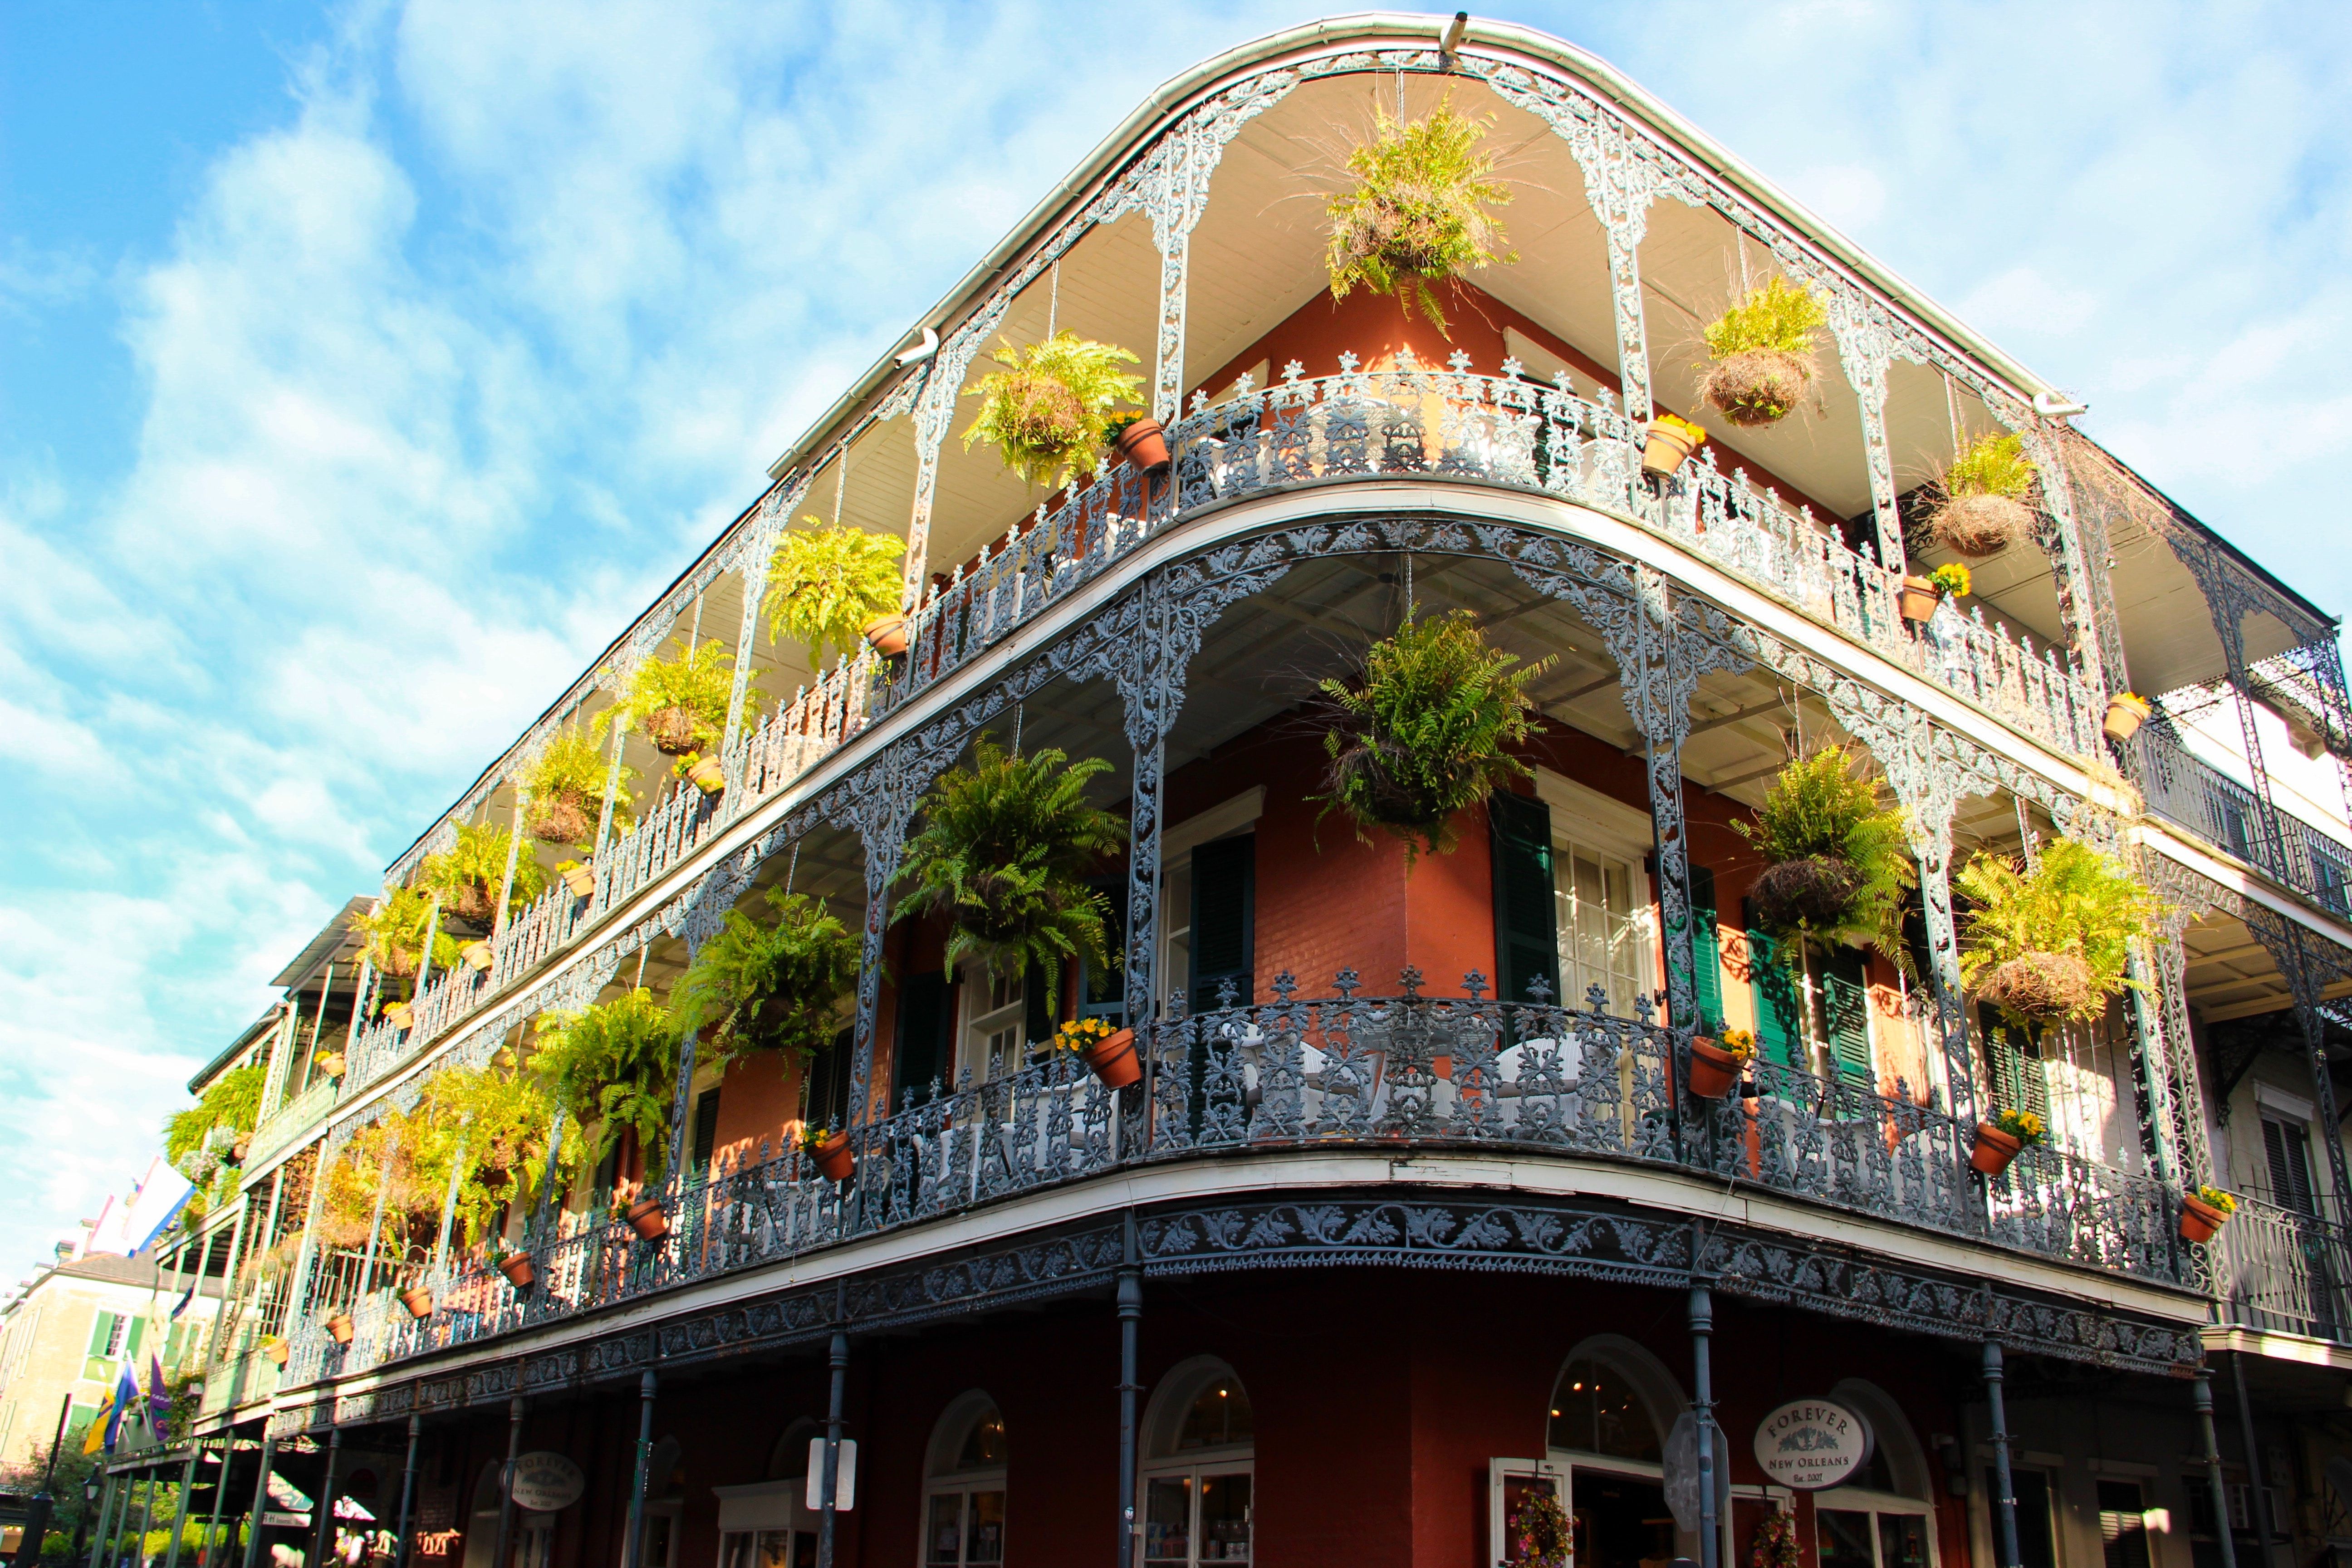 Building in the French Quarter of New Orleans, United States